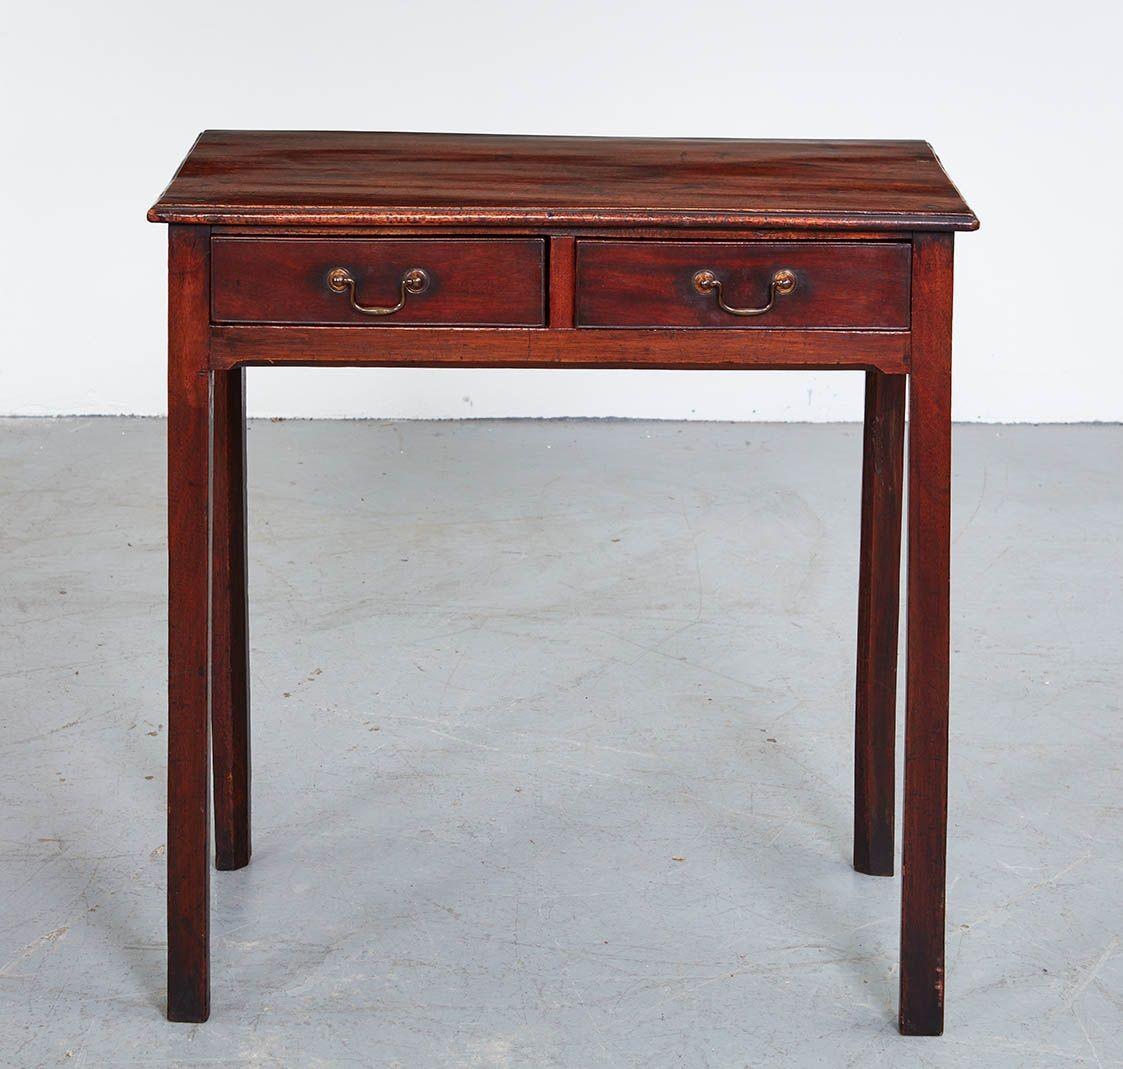 A simple and elegant side table in figured mahogany having a single plank rectangular molded edge overhanging top on straight apron with integral corner brackets on four straight square section legs. Works well in a formal room or as a nightstand